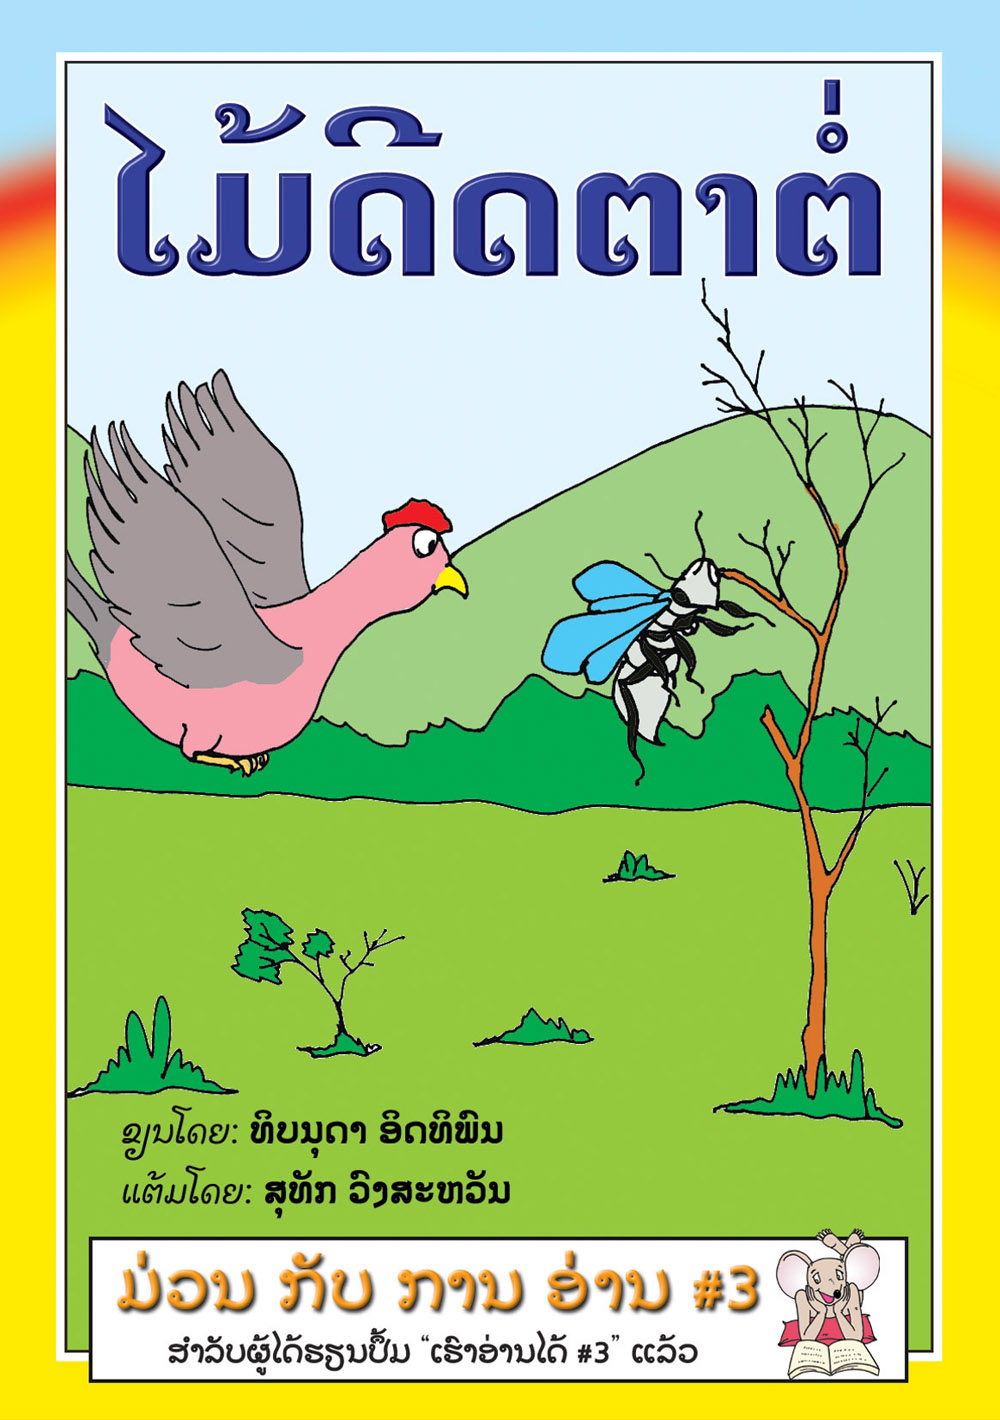 The Wasp with a Stick in its Eye large book cover, published in Lao language